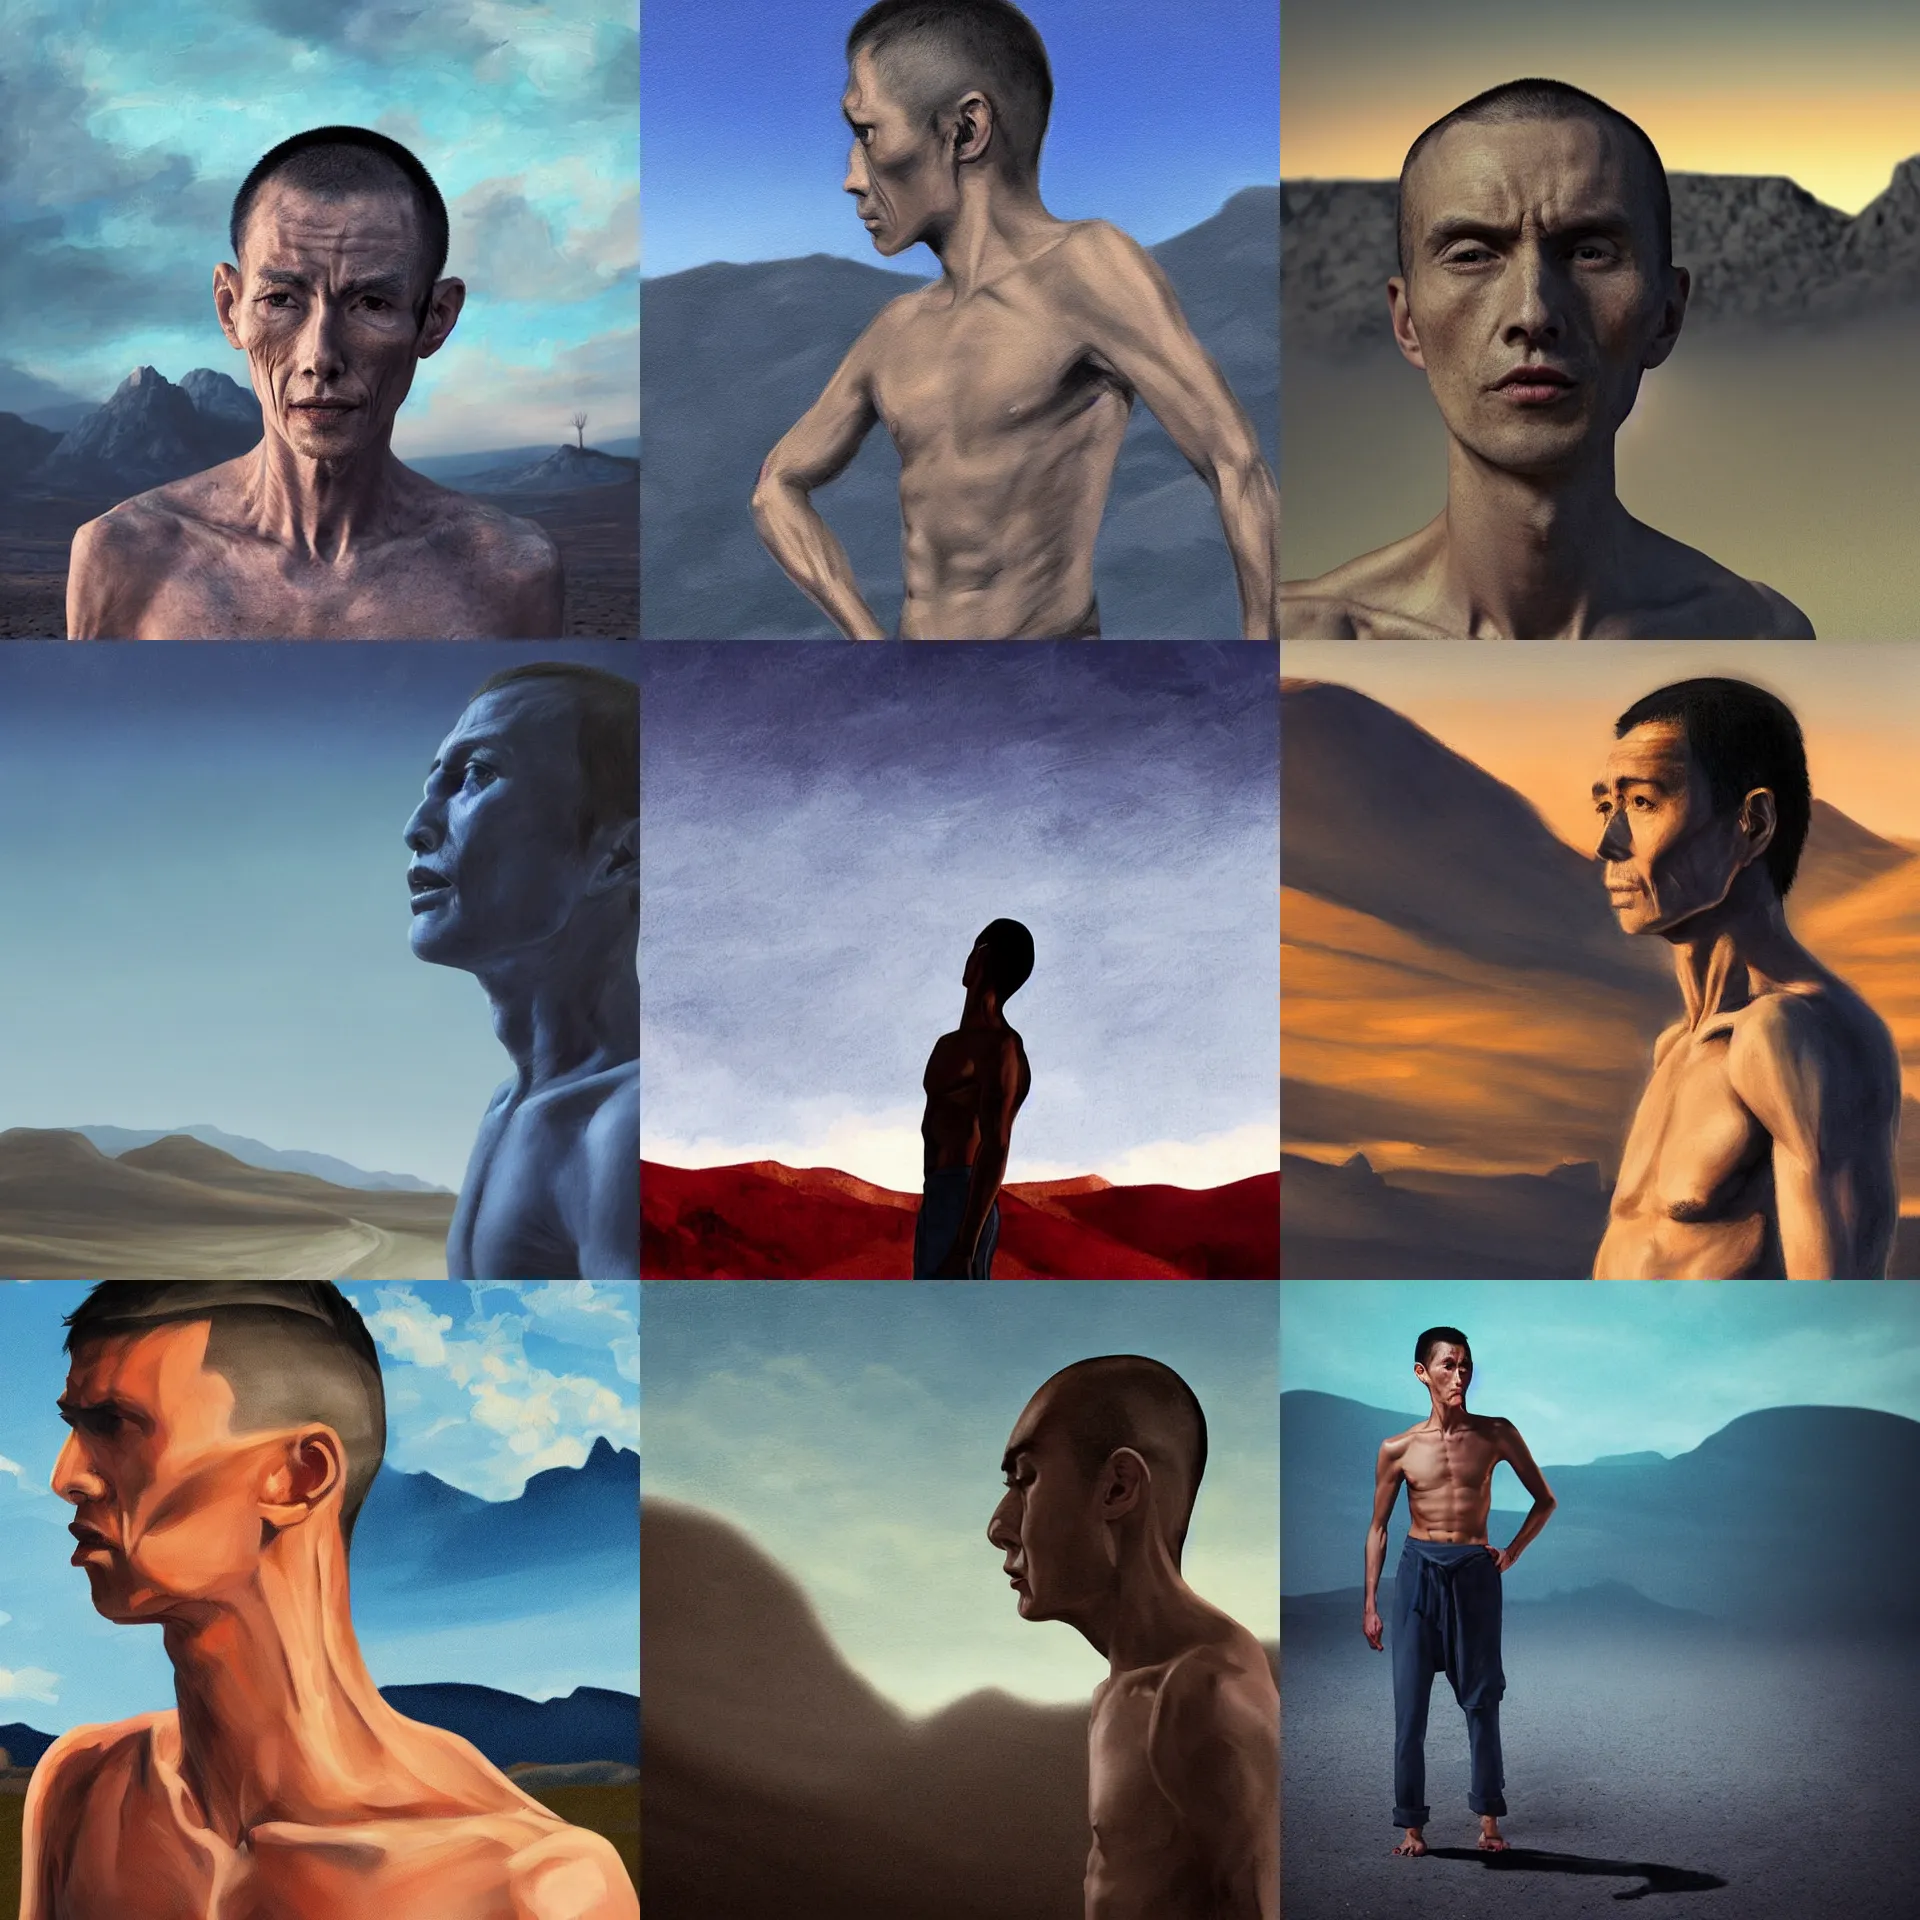 Prompt: Side view close up of a gaunt, skinny man with a large head and big eyes, a pronounced chin, a sad expression, shirtless, walking over a barren landscape at night. Hills in the background. dramatic lighting. Blue color palette. Digital art oil painting.